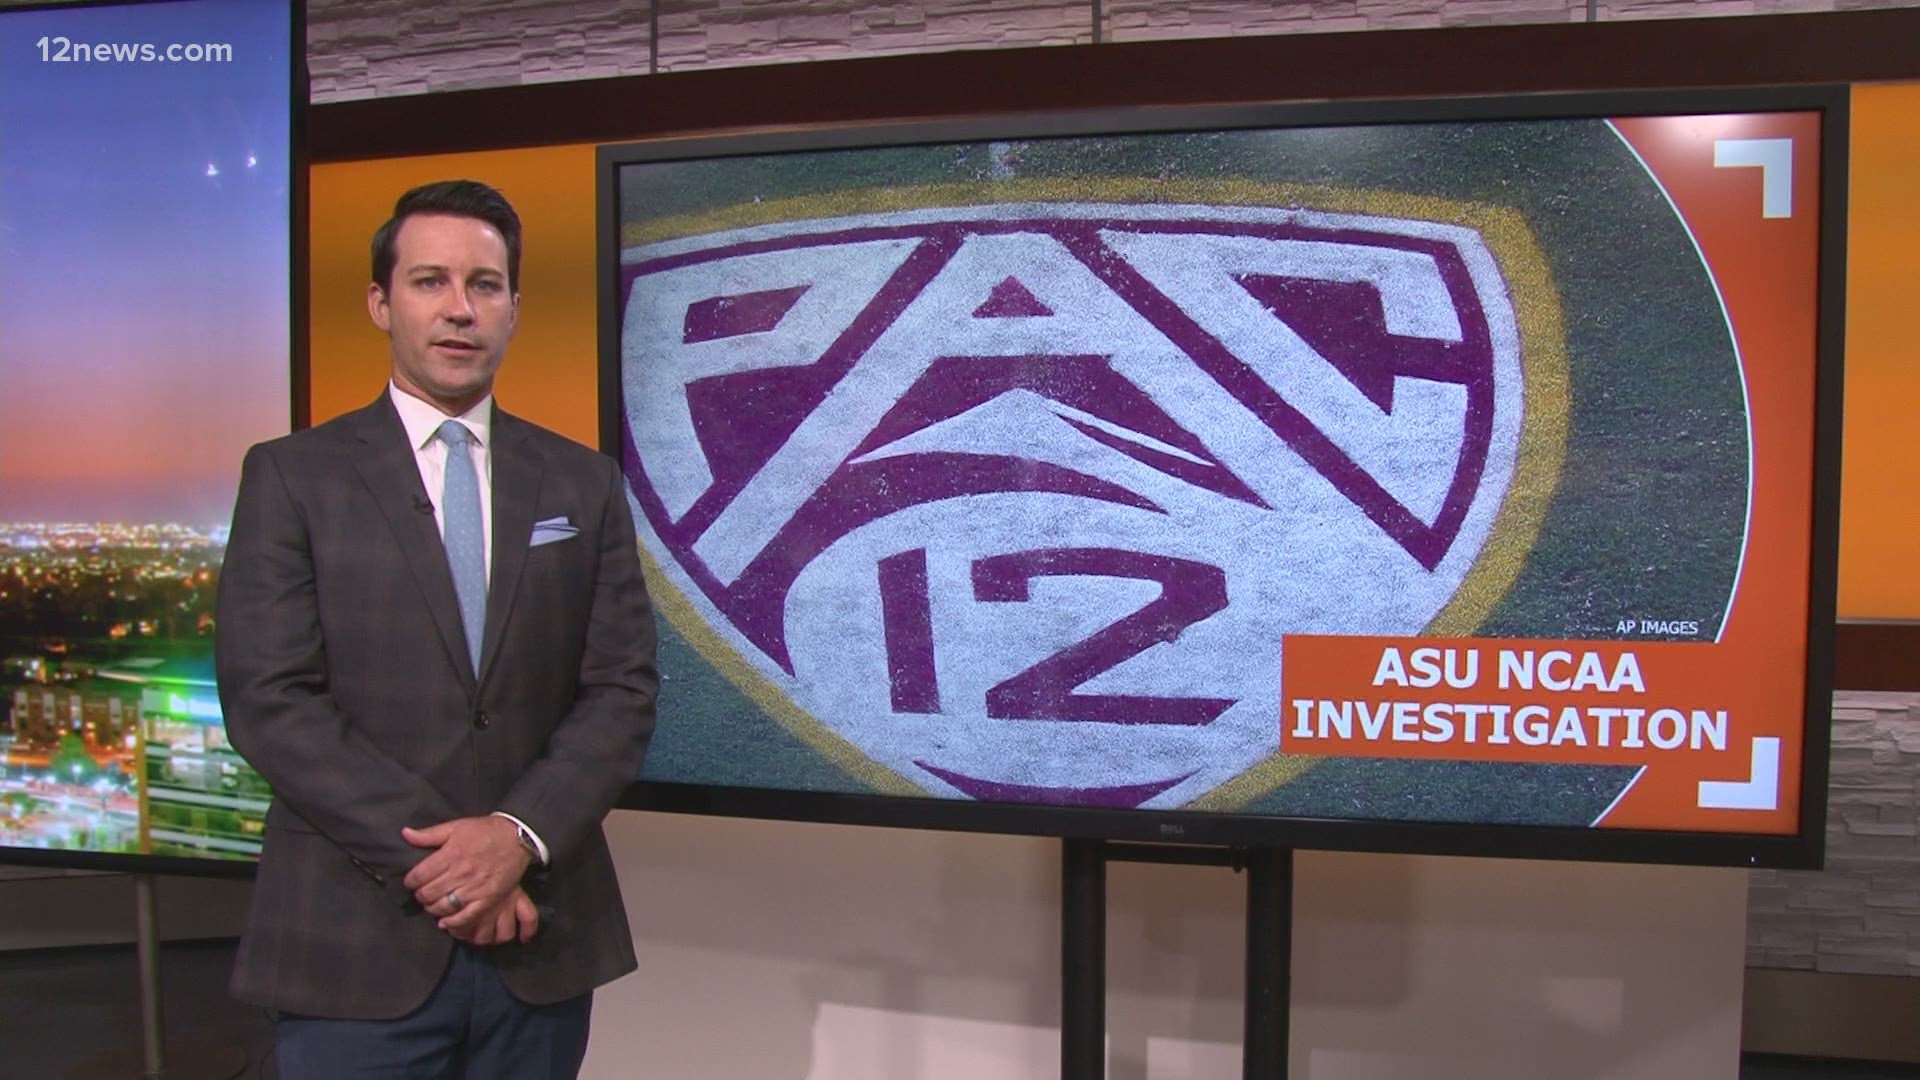 ASU’s football program is under investigation by the NCAA, flagged for possible recruitment violations, according to multiple reports.